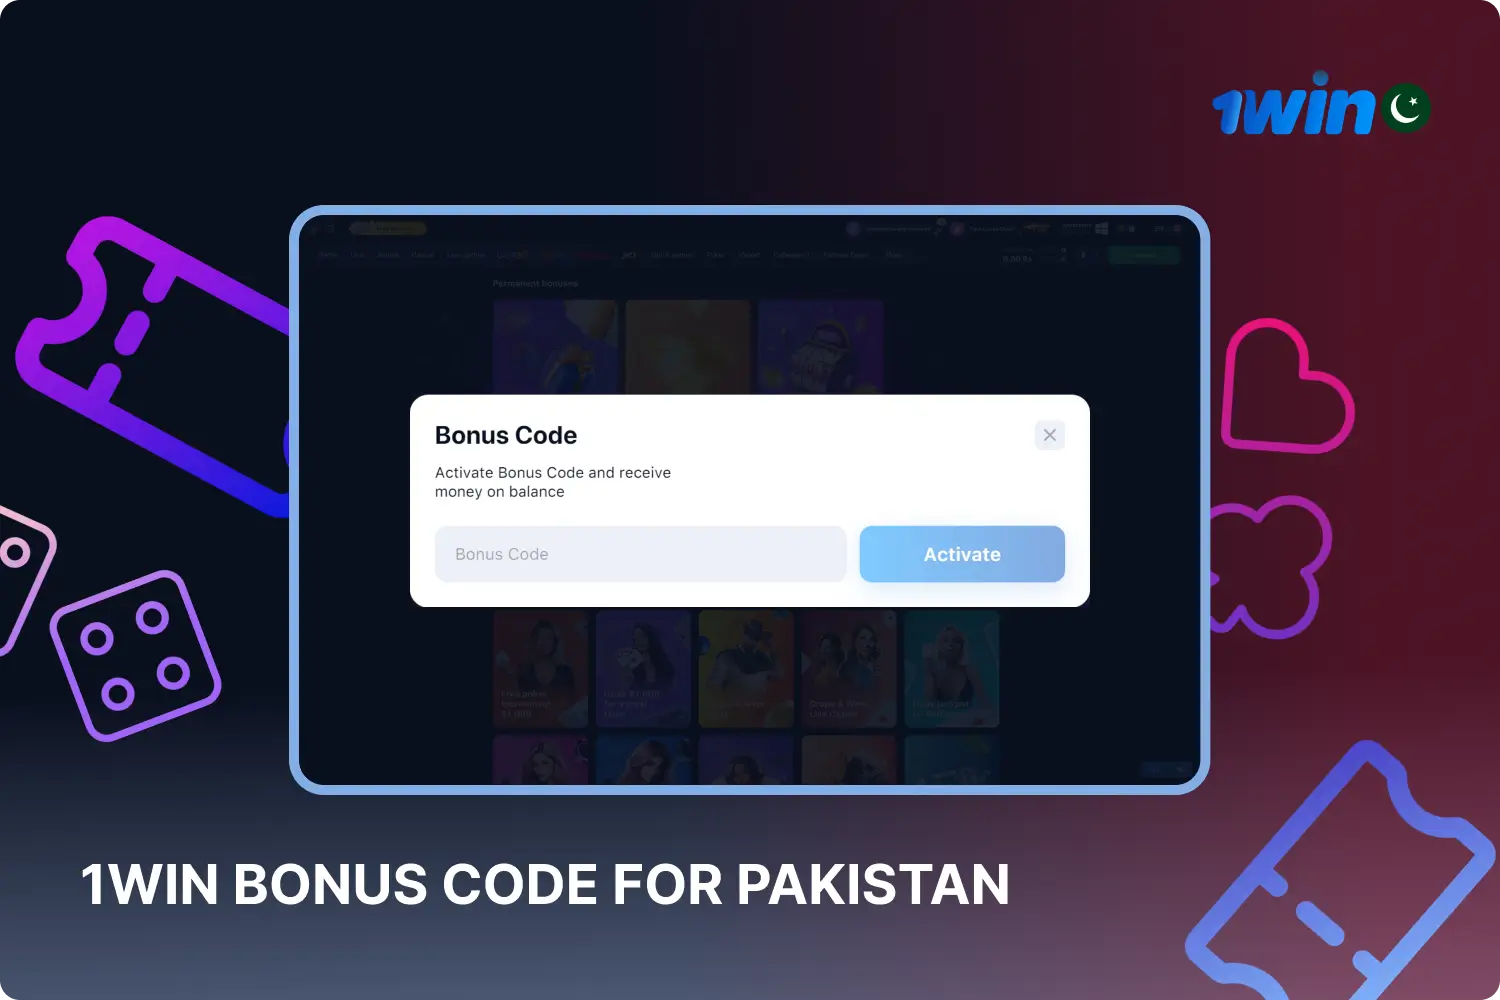 1win bonus code for Pakistan is a promotional offer for new players to get a nice welcome bonus